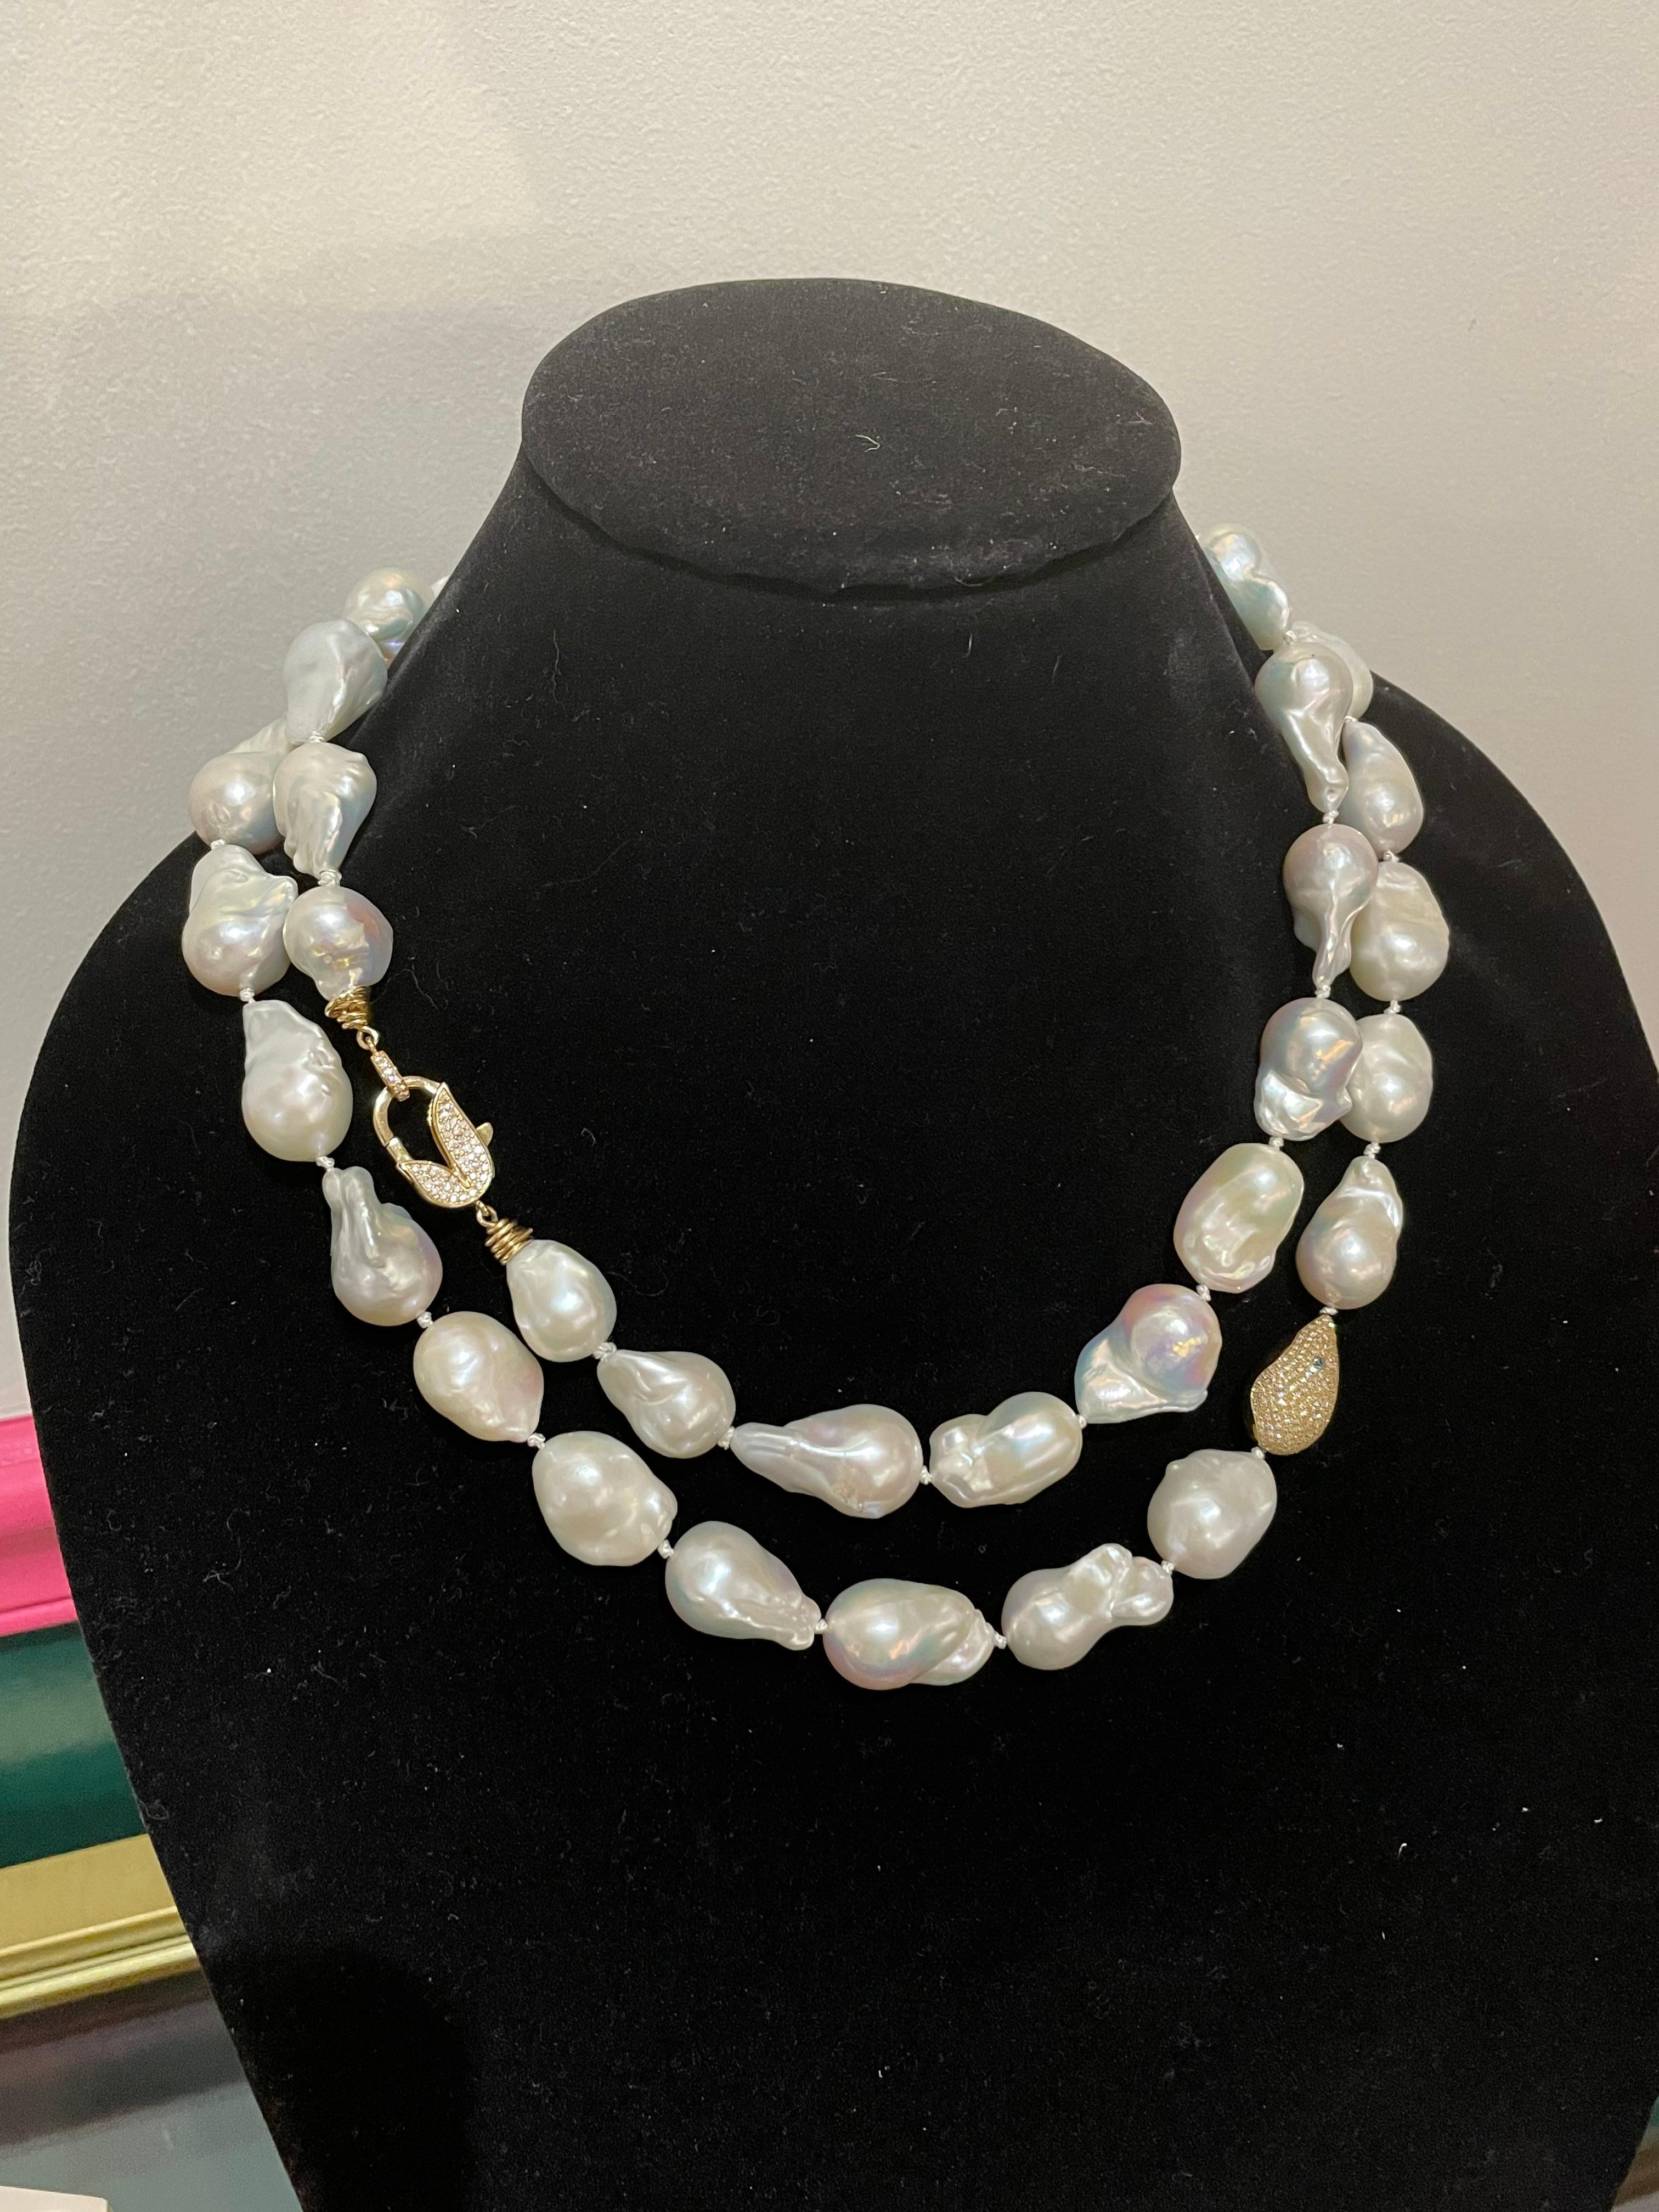 Long Baroque pearl necklace by rising star designer, Jordan Alexander. This unique necklace features extremely high quality pearls accented by 18kt gold and diamonds clasp and bead with a sapphire feature. This necklace can we worn doubled over or